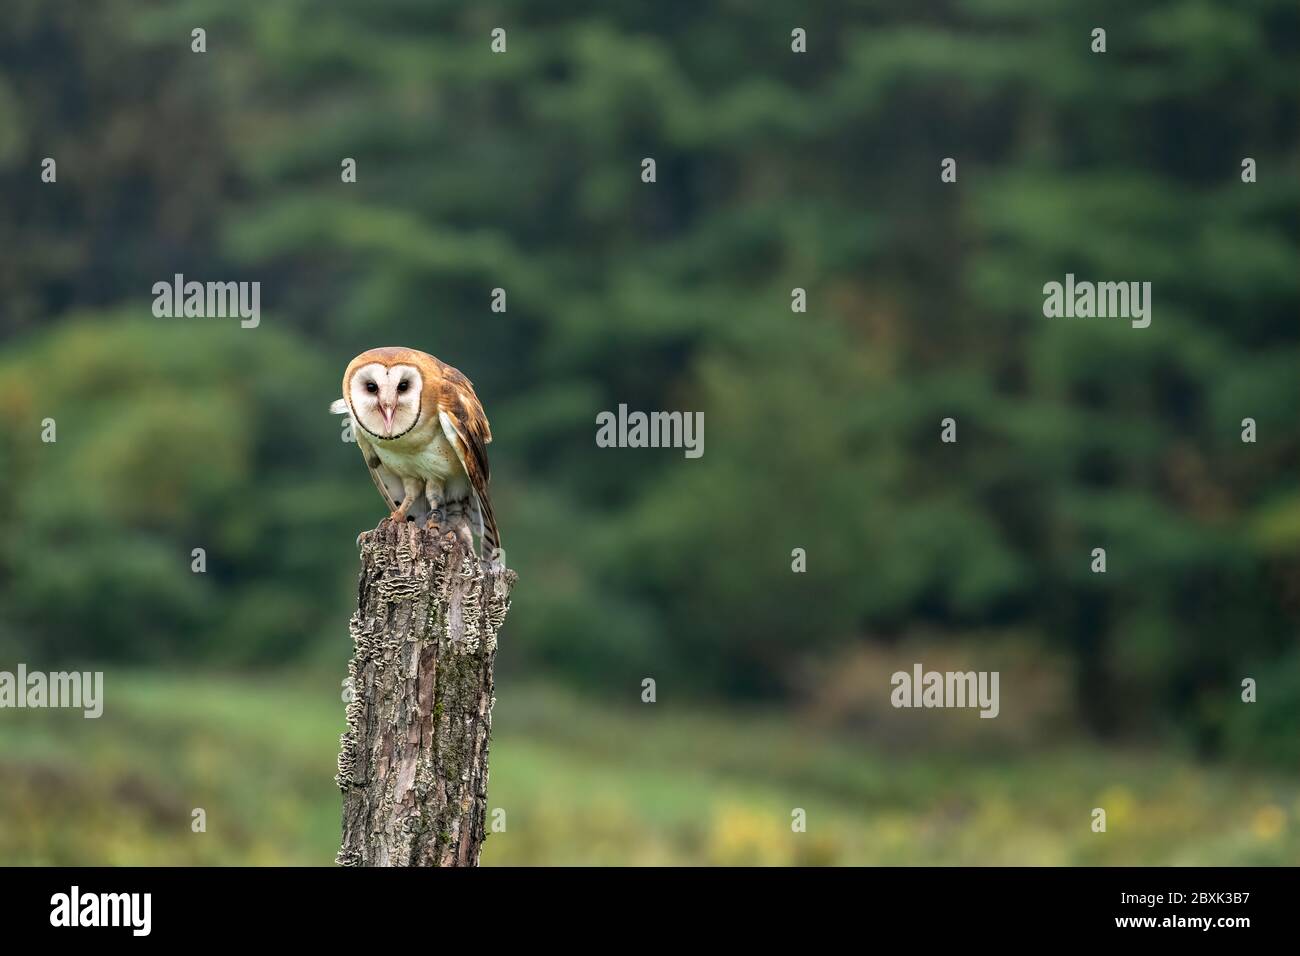 Barn owl standing on a tree stump in the middle of a field with trees in the background. Stock Photo